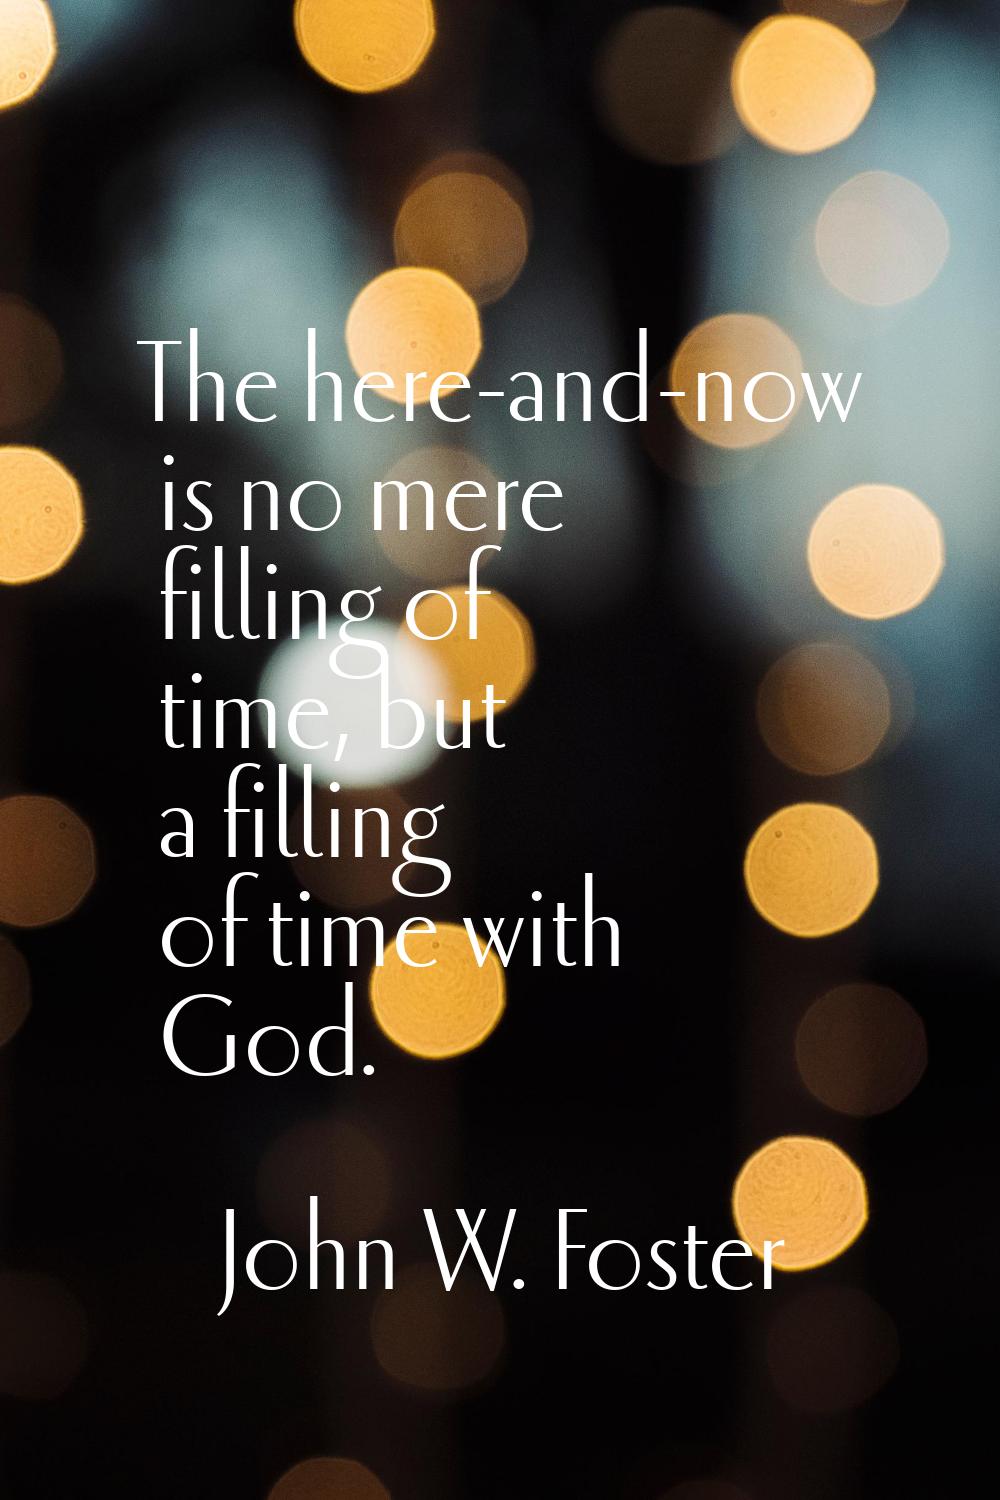 The here-and-now is no mere filling of time, but a filling of time with God.